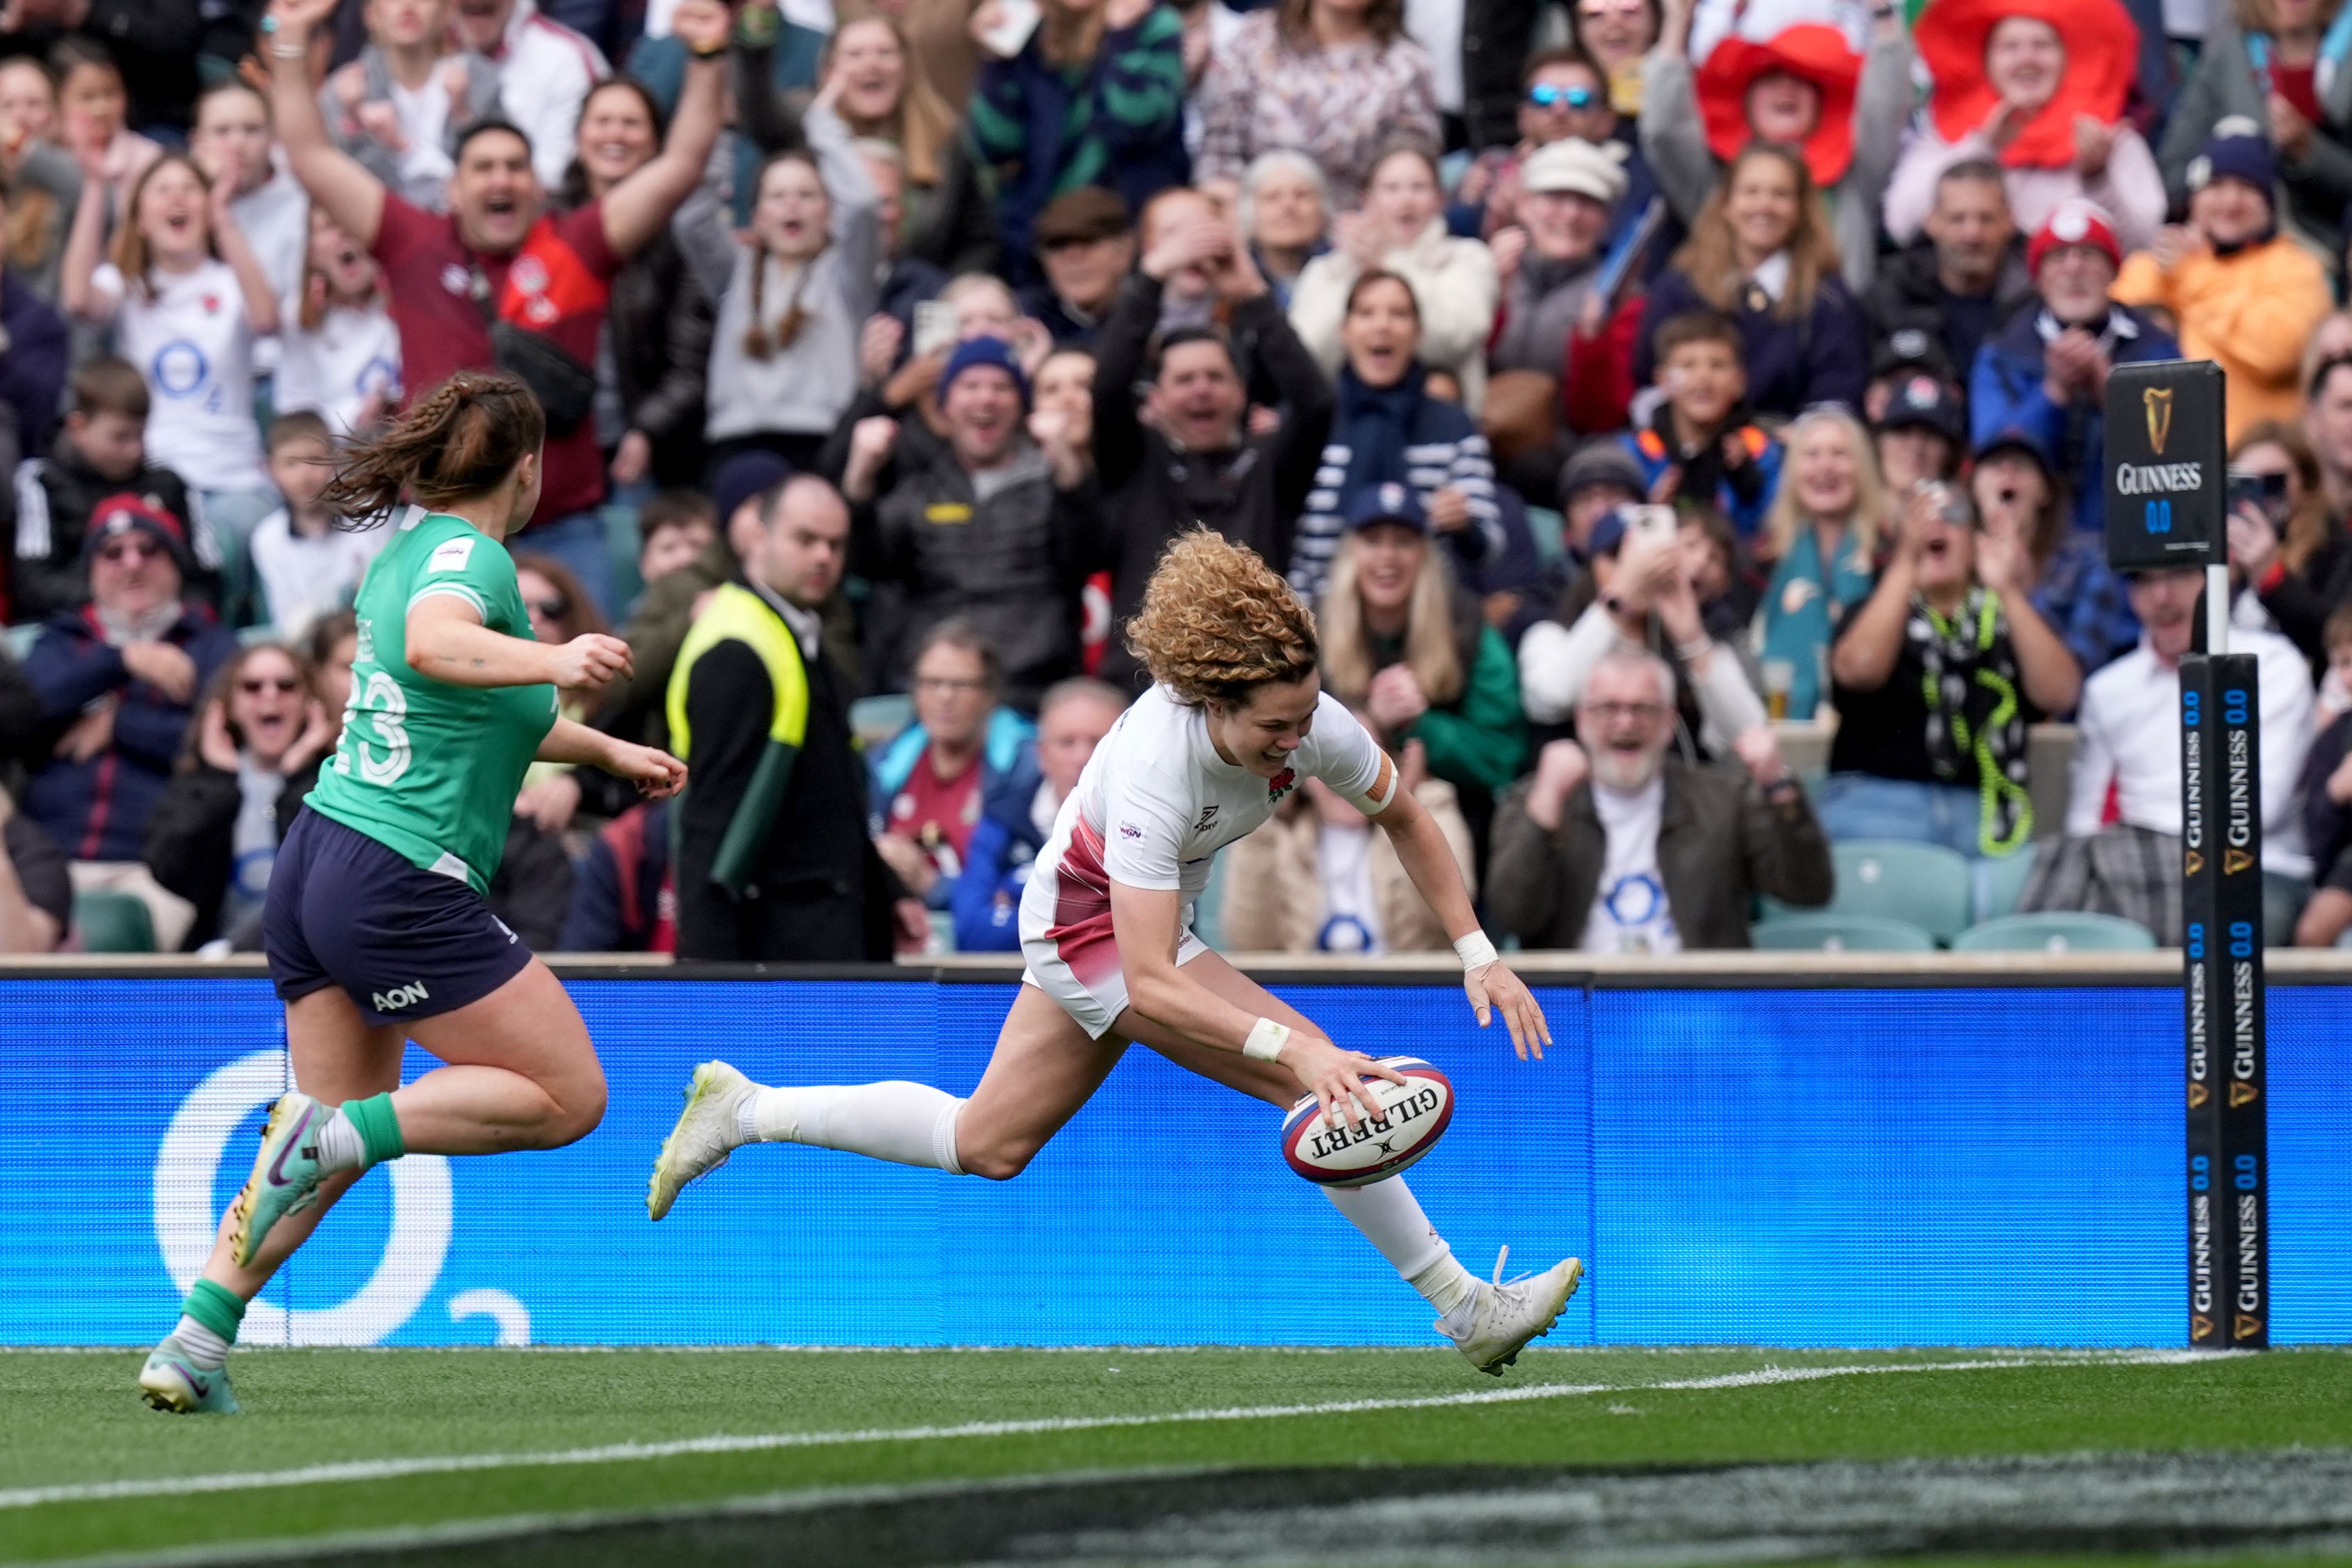 Ellie Kildunne is relishing the chance to take on France